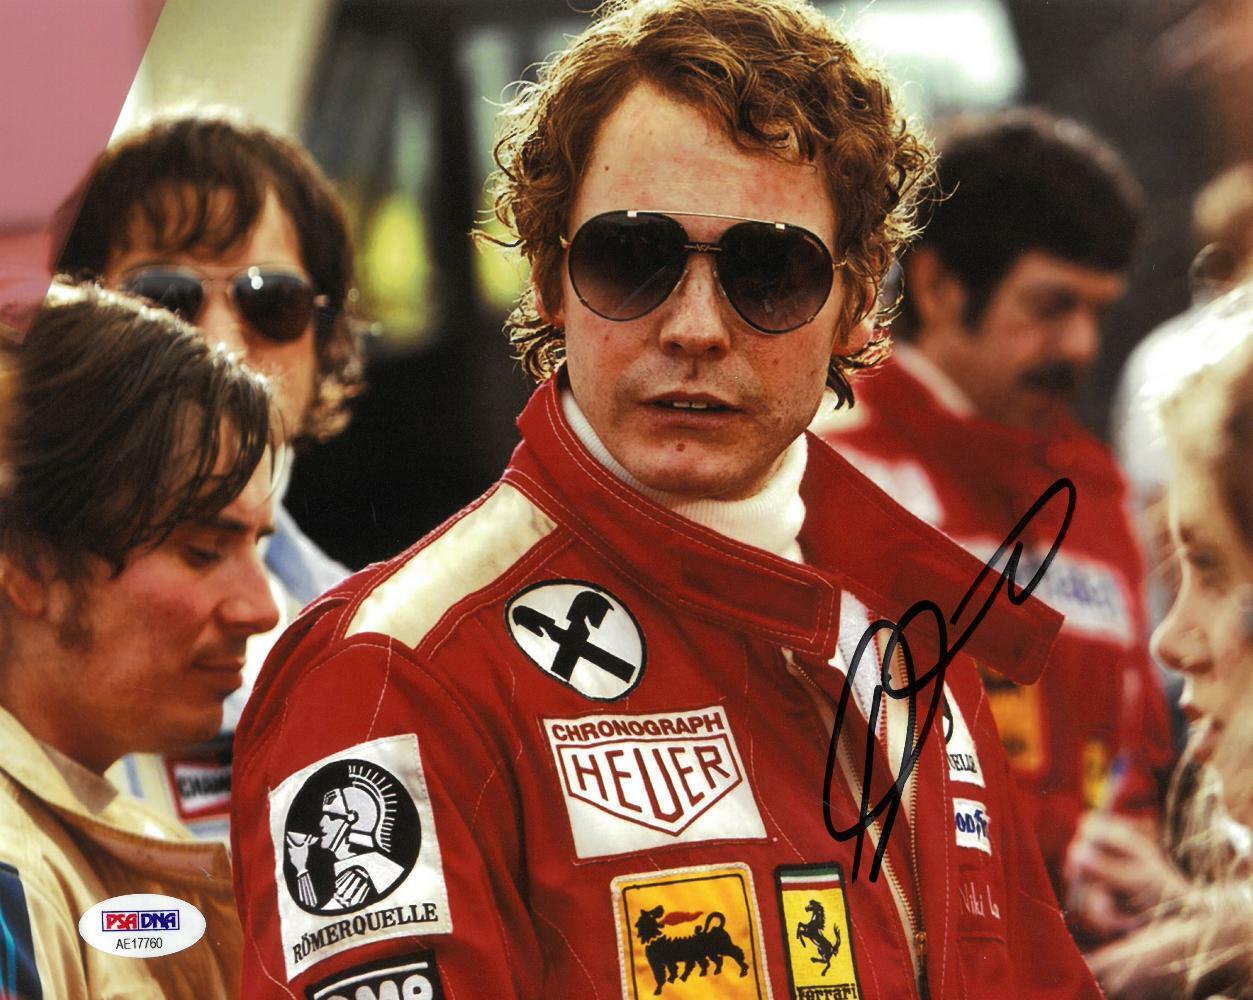 Daniel Bruhl Signed Rush Authentic Autographed 8x10 Photo Poster painting PSA/DNA #AE17760